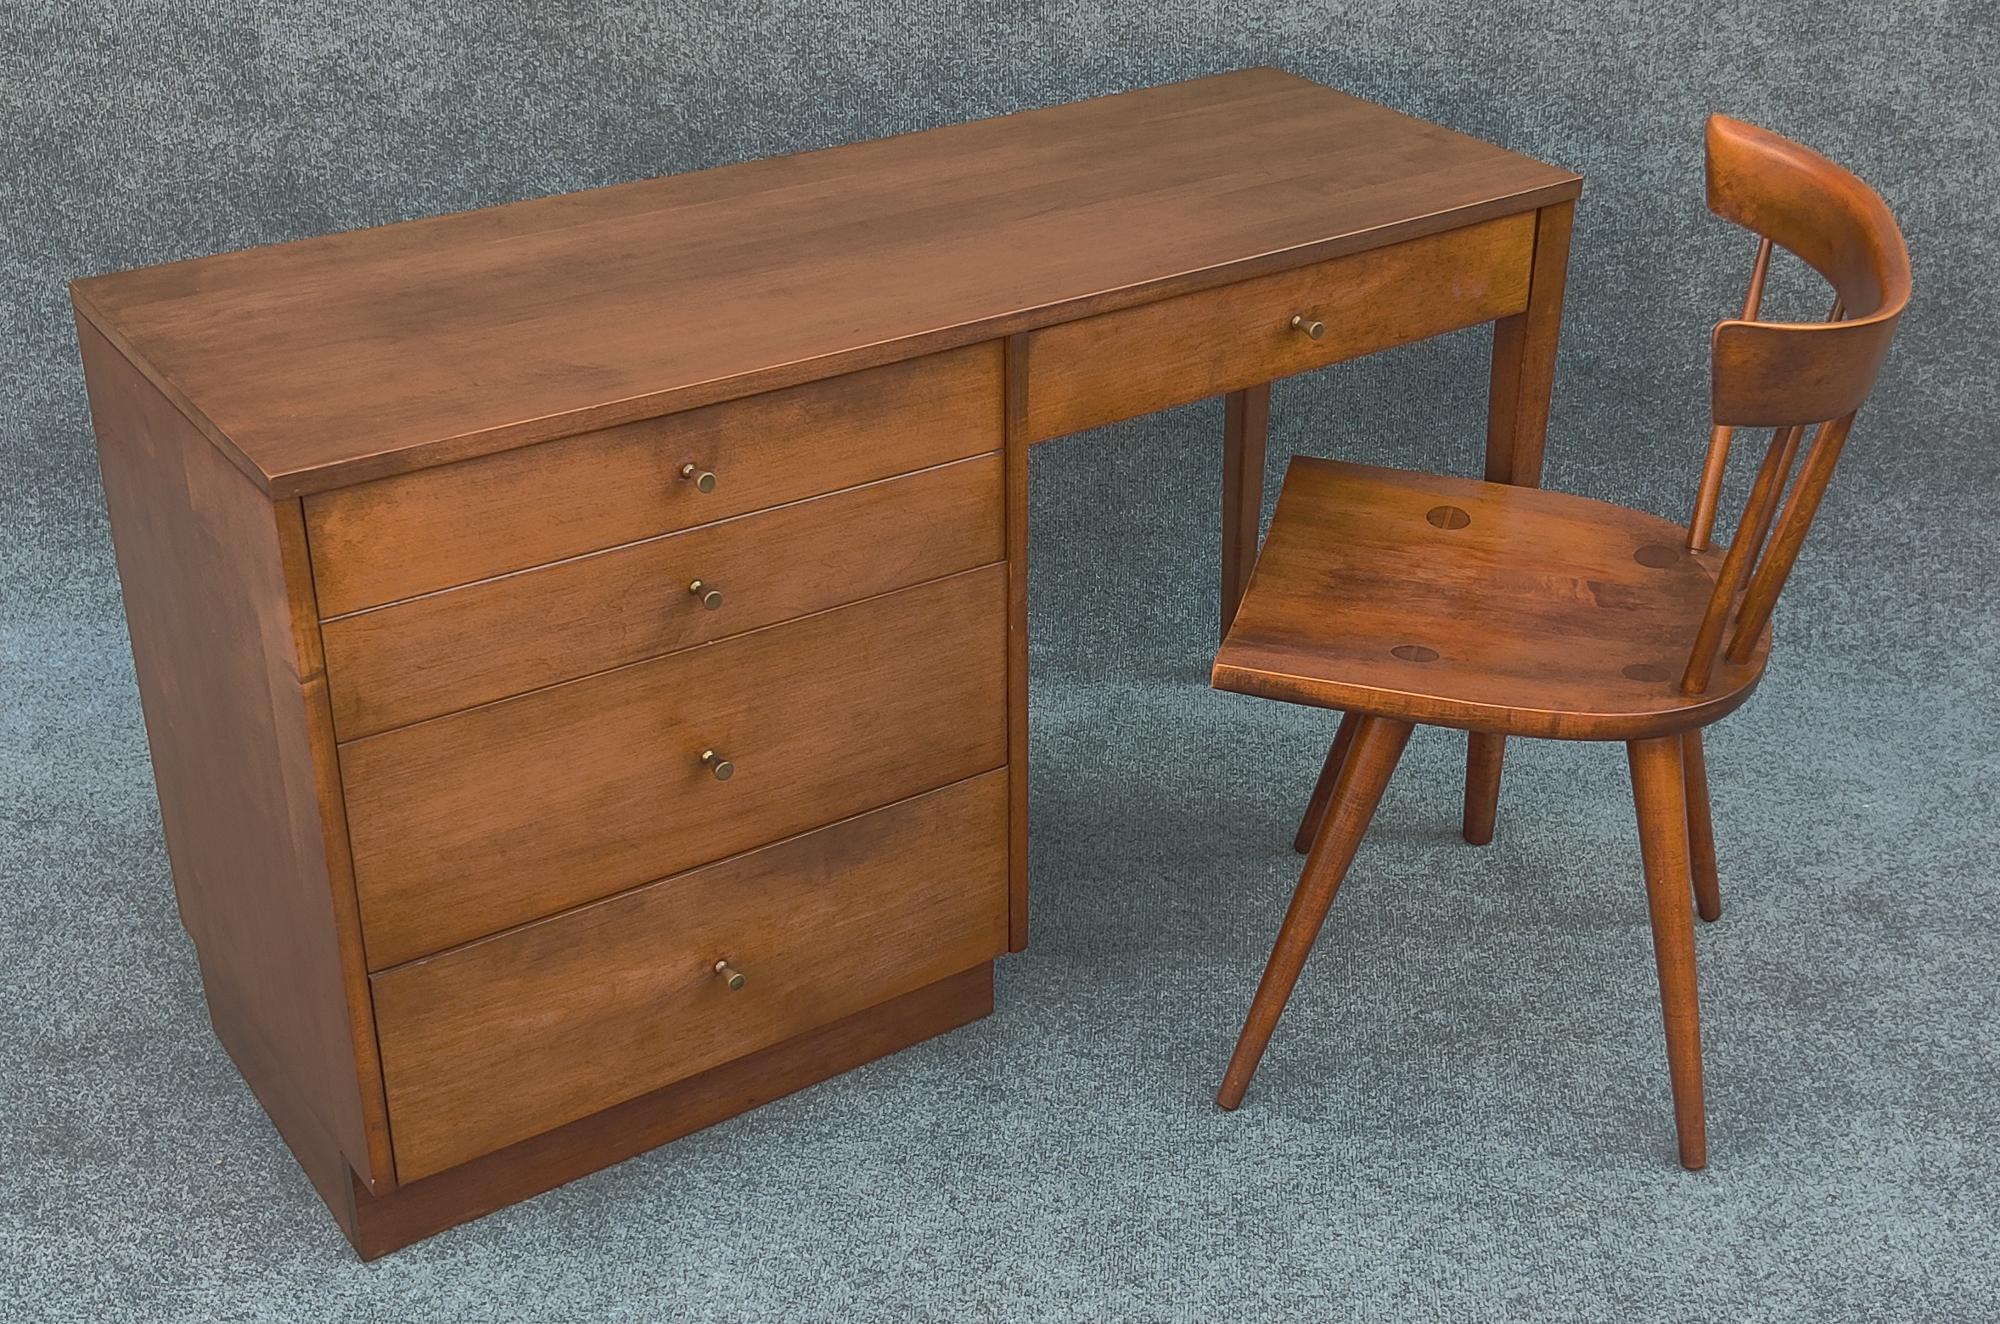 A handsome and very original condition, Desk + Chair, designed by Paul McCobb and built by Winchendon Furniture Co, circa 1950s. These are part of the Planner Design Group, which is know for it's simple clean lines and high quality construction.